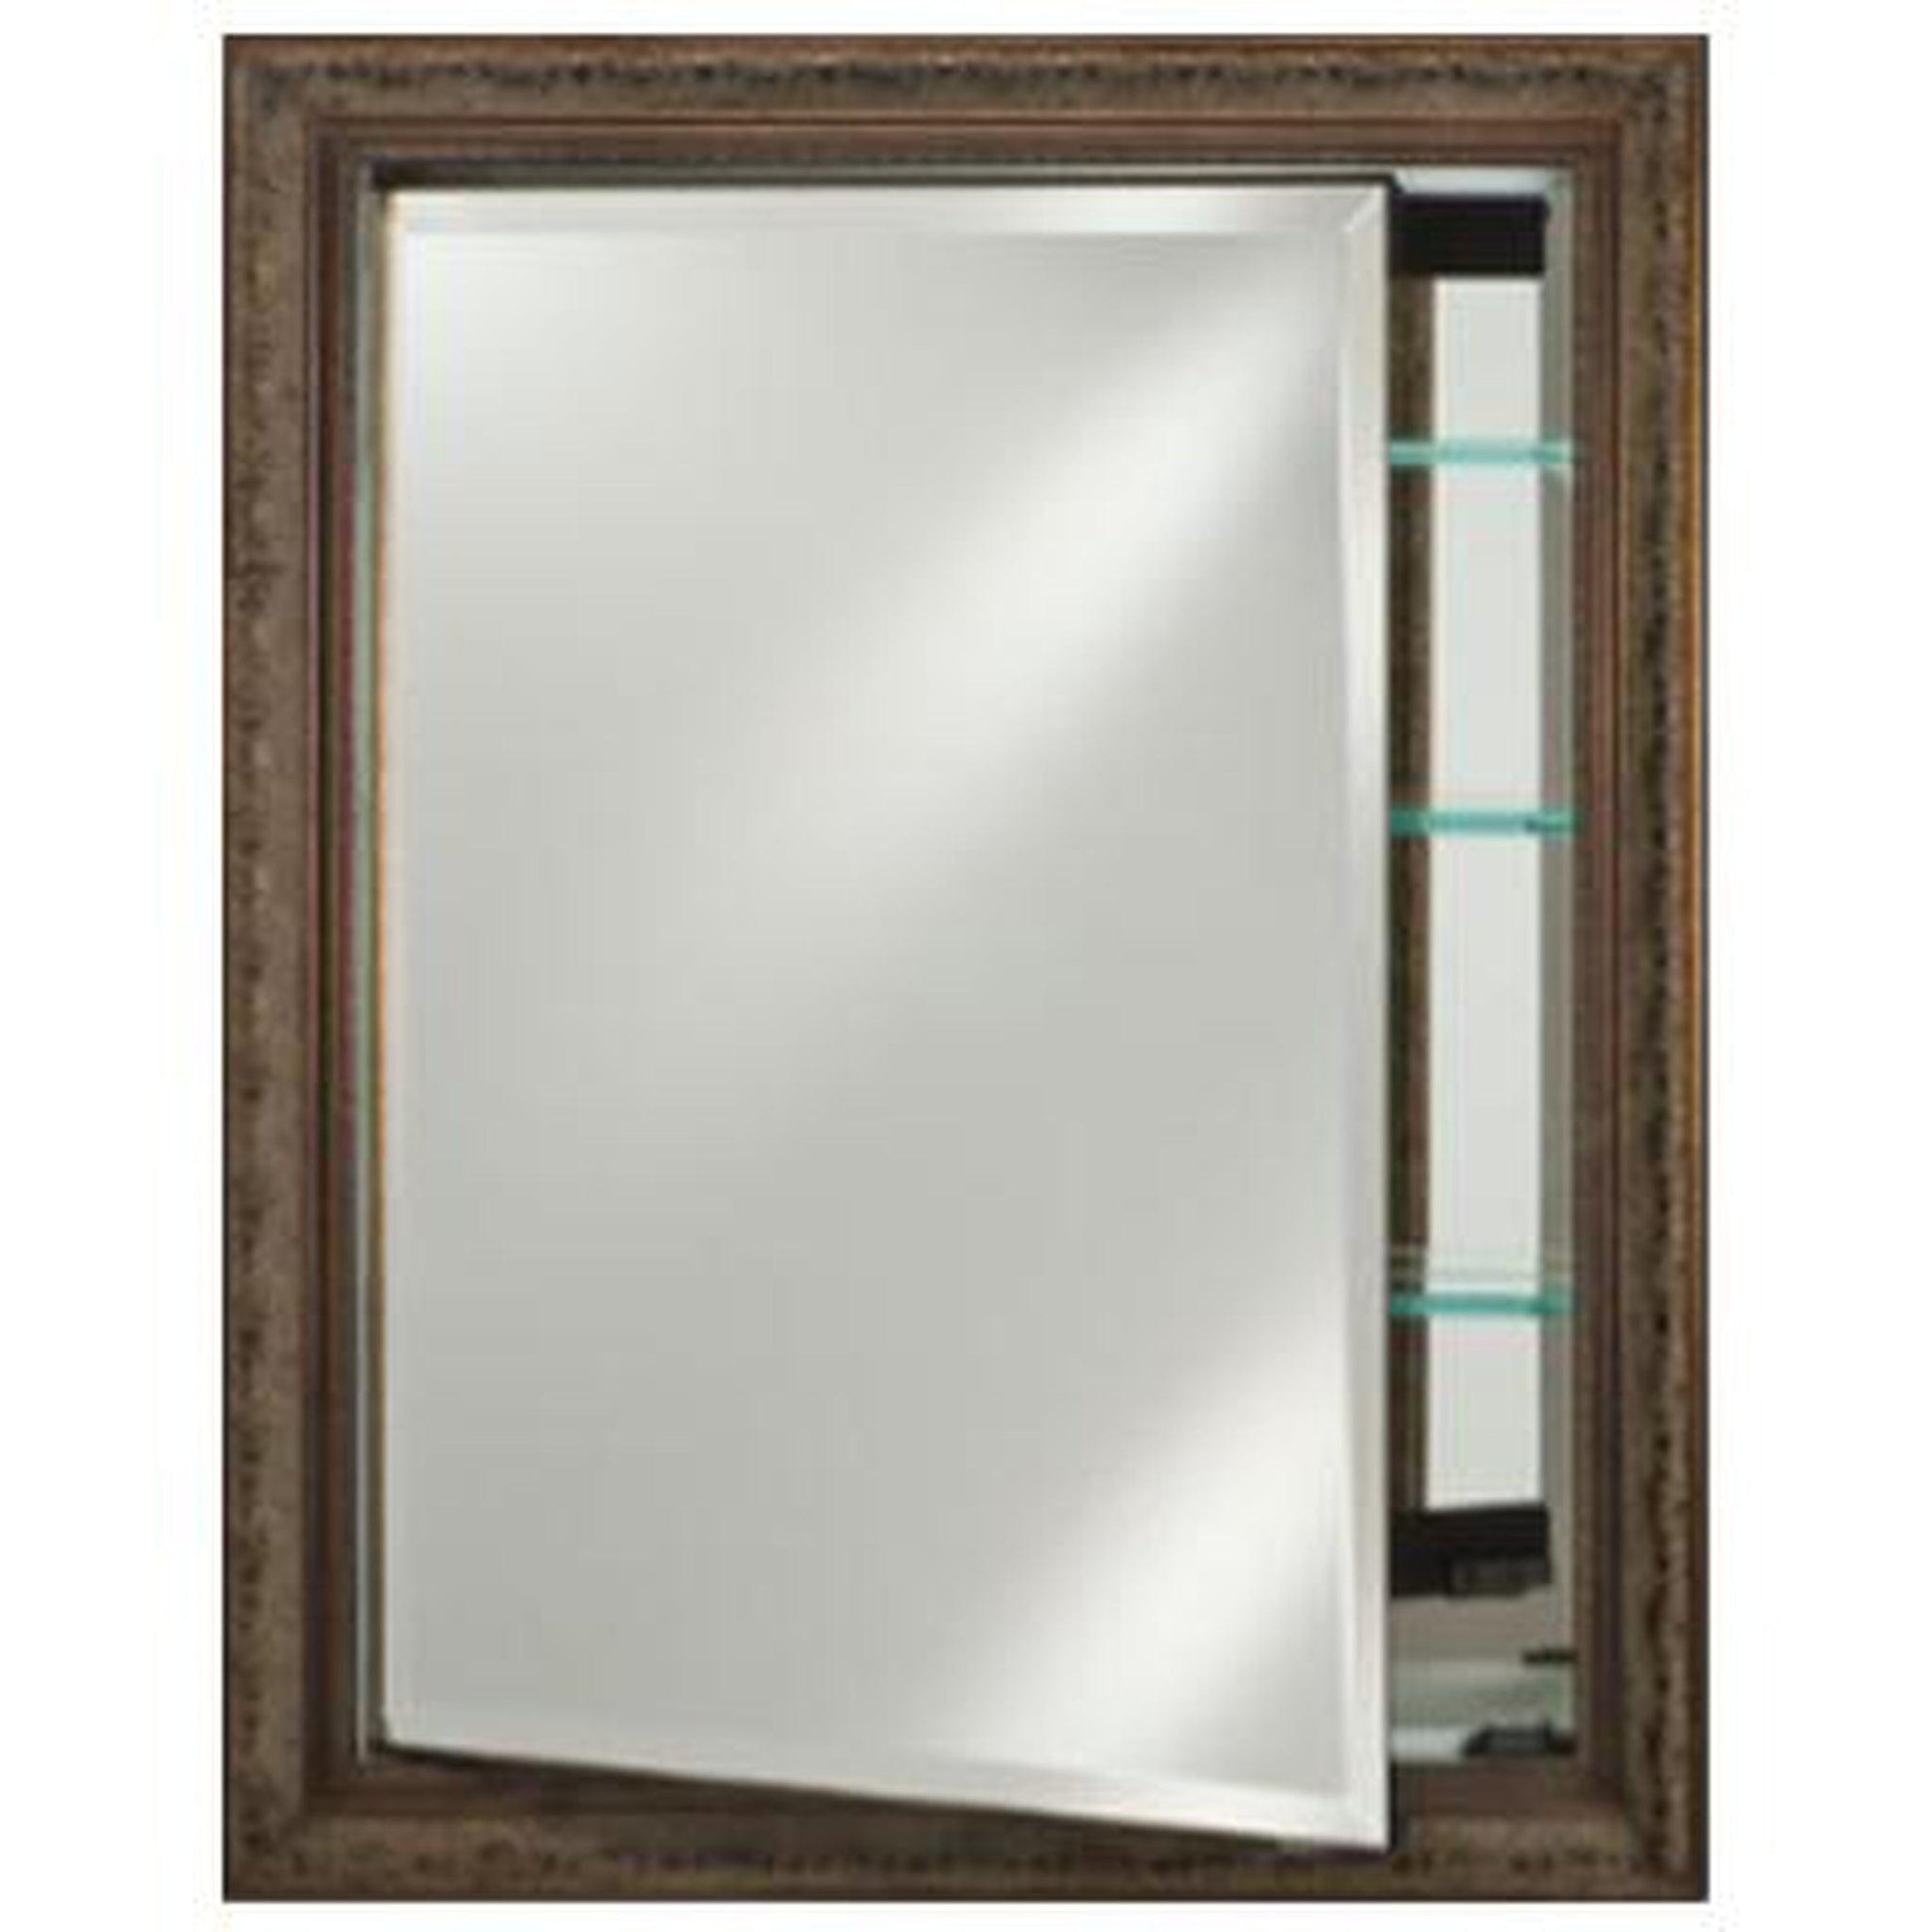 Afina Signature 20" x 30" Polished Glimmer-Scallop Recessed Reversible Hinged Single Door Medicine Cabinet With Beveled Edge Mirror